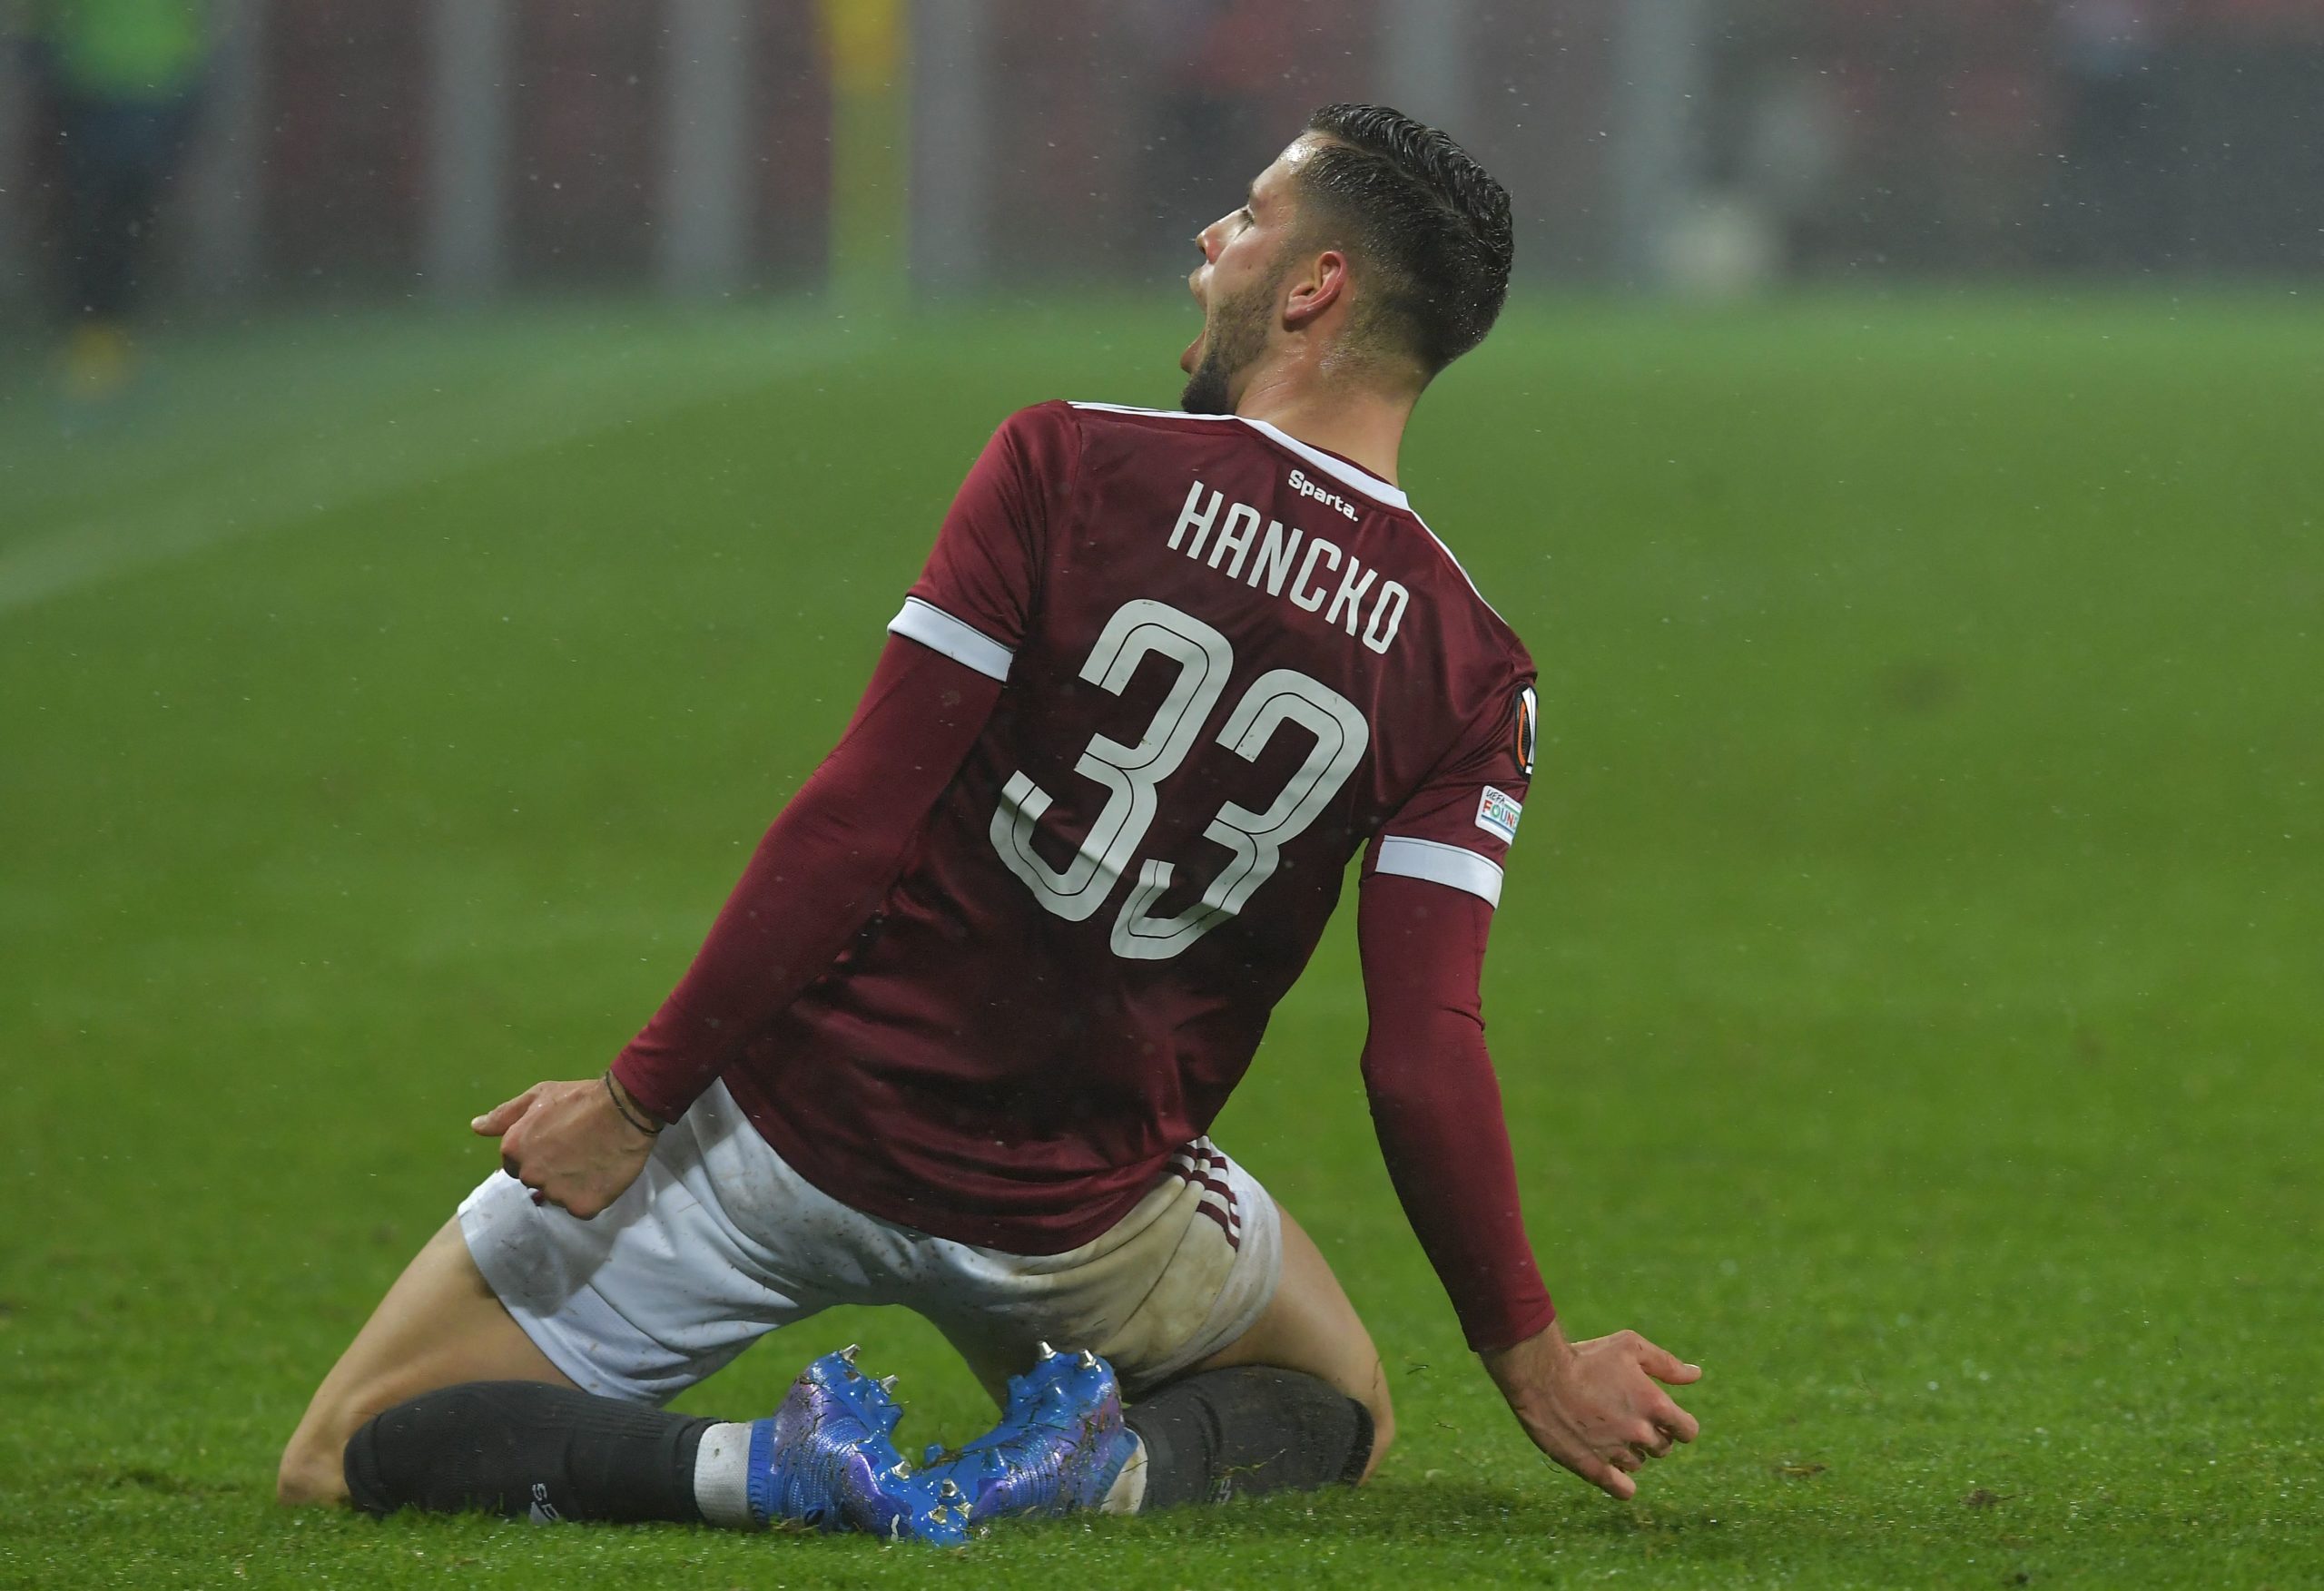 David Hancko could join West Ham in the summer according to his agent